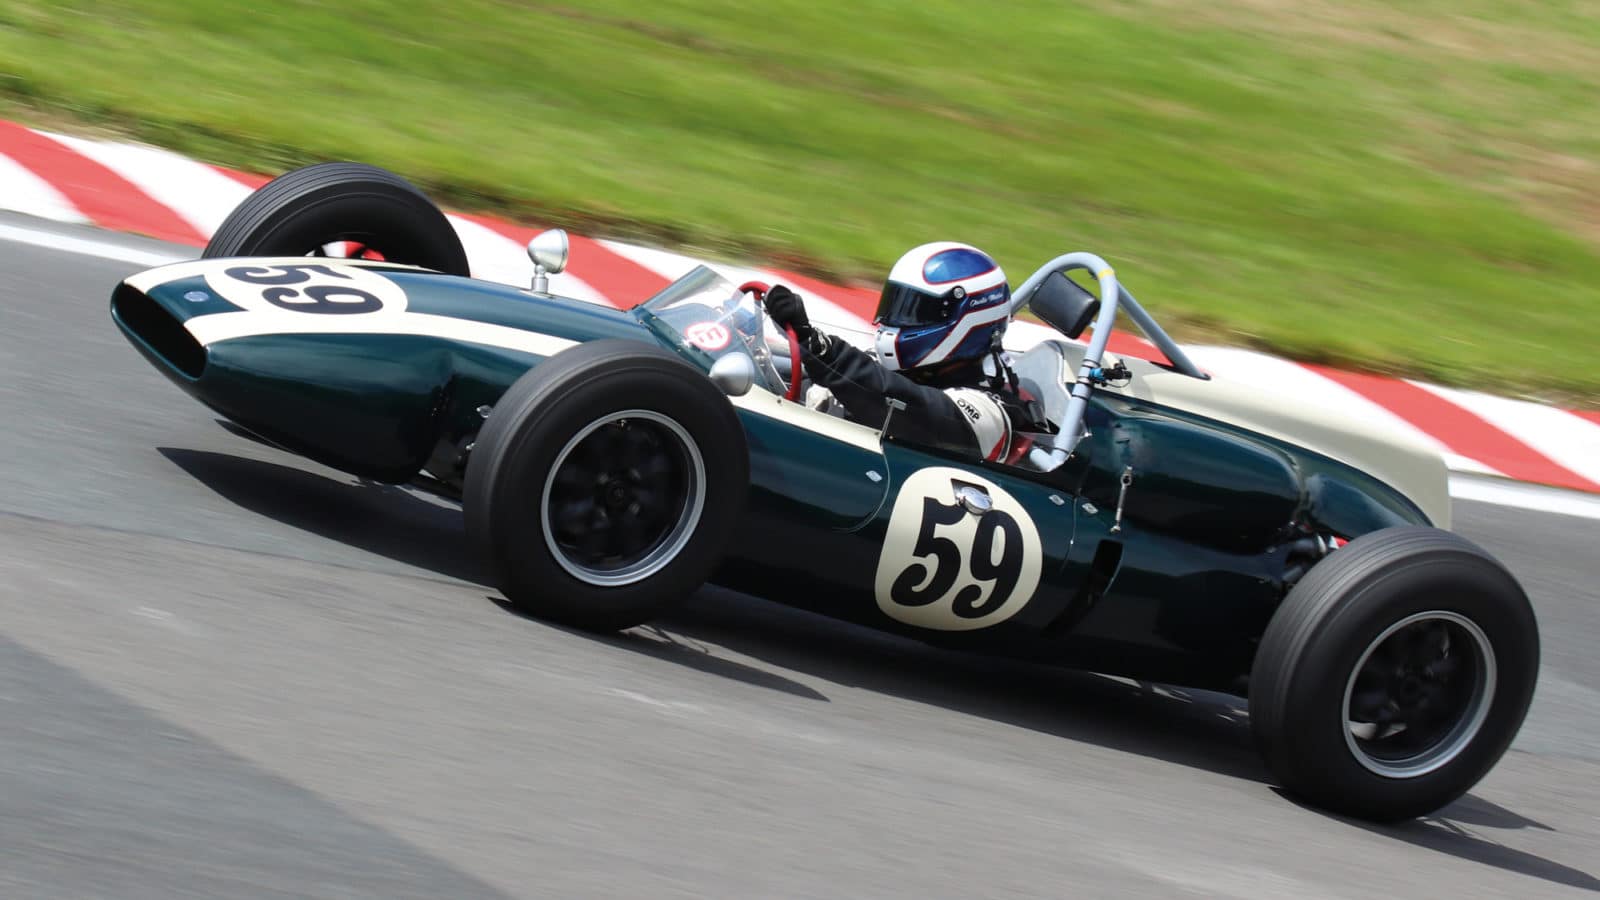 Cooper T53 of Charlie Martin at Oulton Park Historic Gold Cup